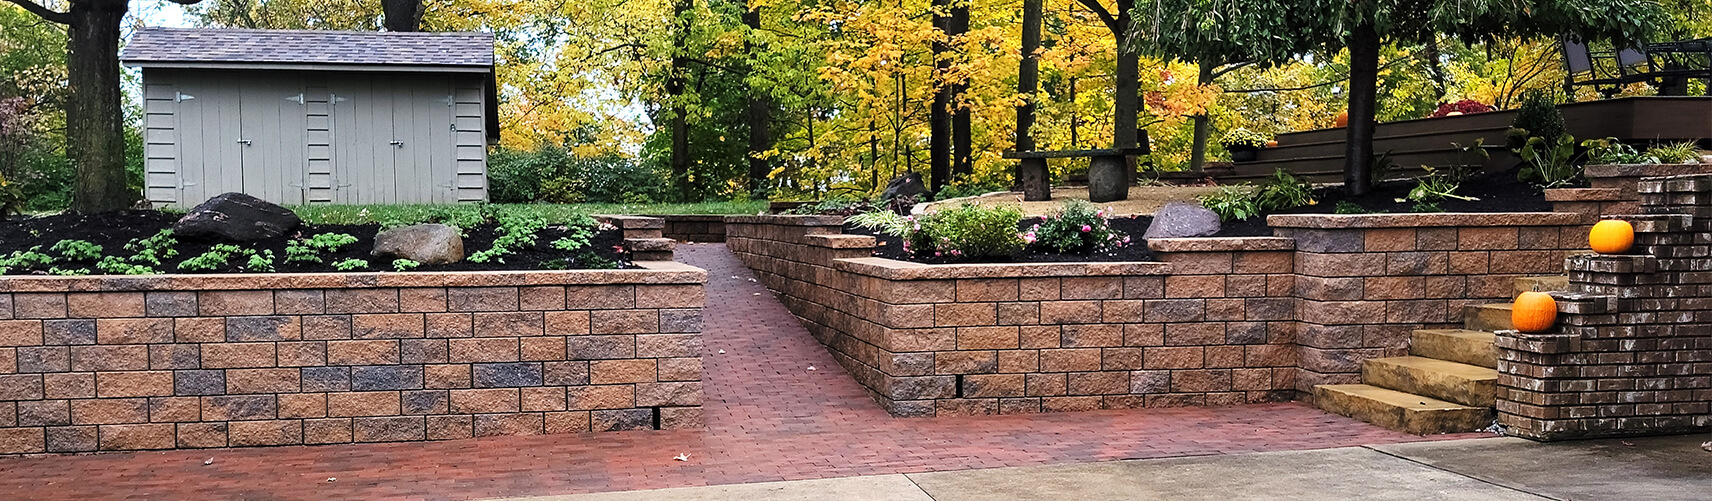 Dayton Landscaping Company, Landscaper and Landscaping Services